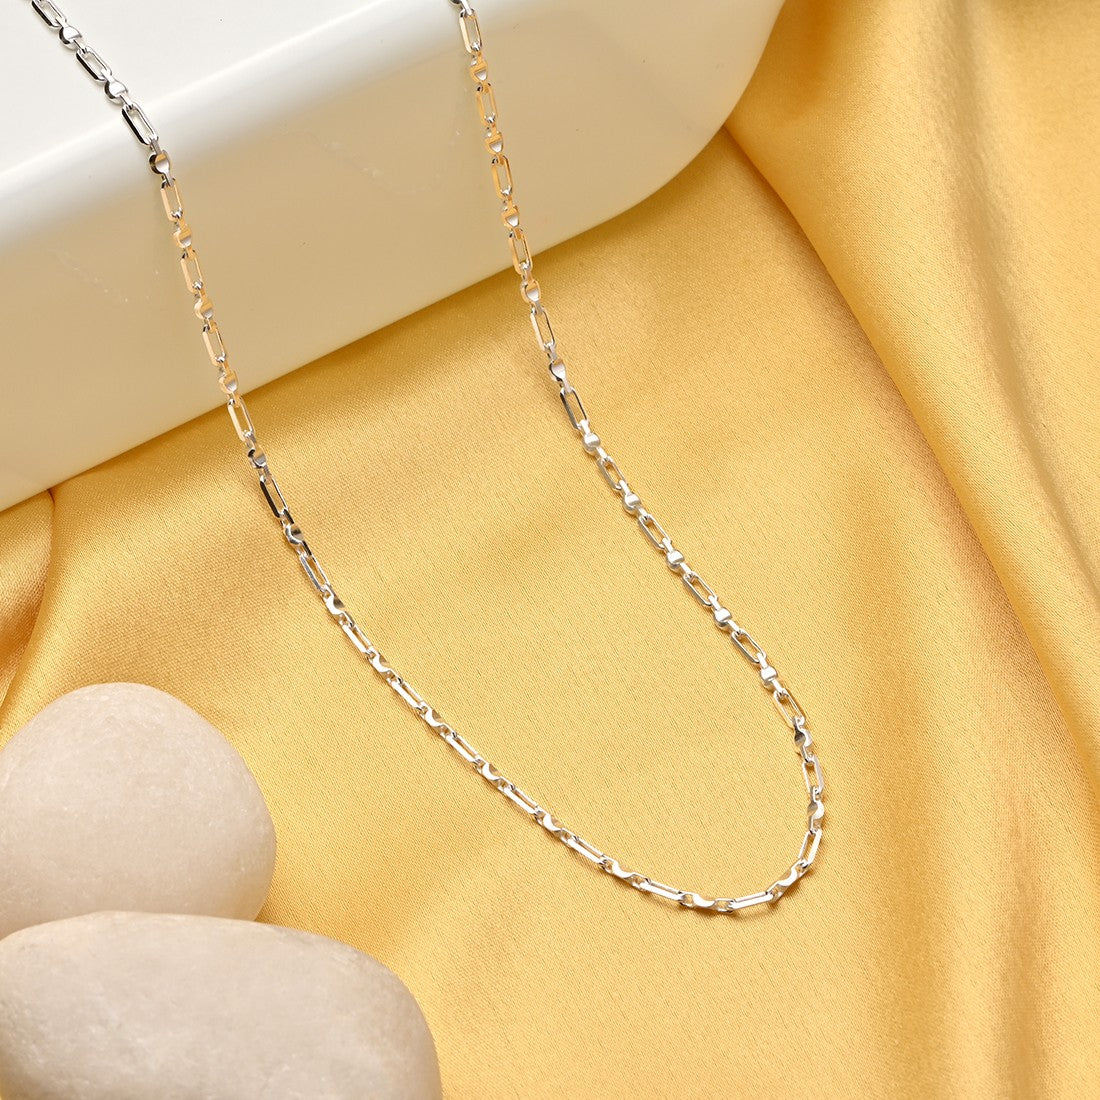 Shimmering Reflections Rhodium-Plated 925 Sterling Silver Chain for Men